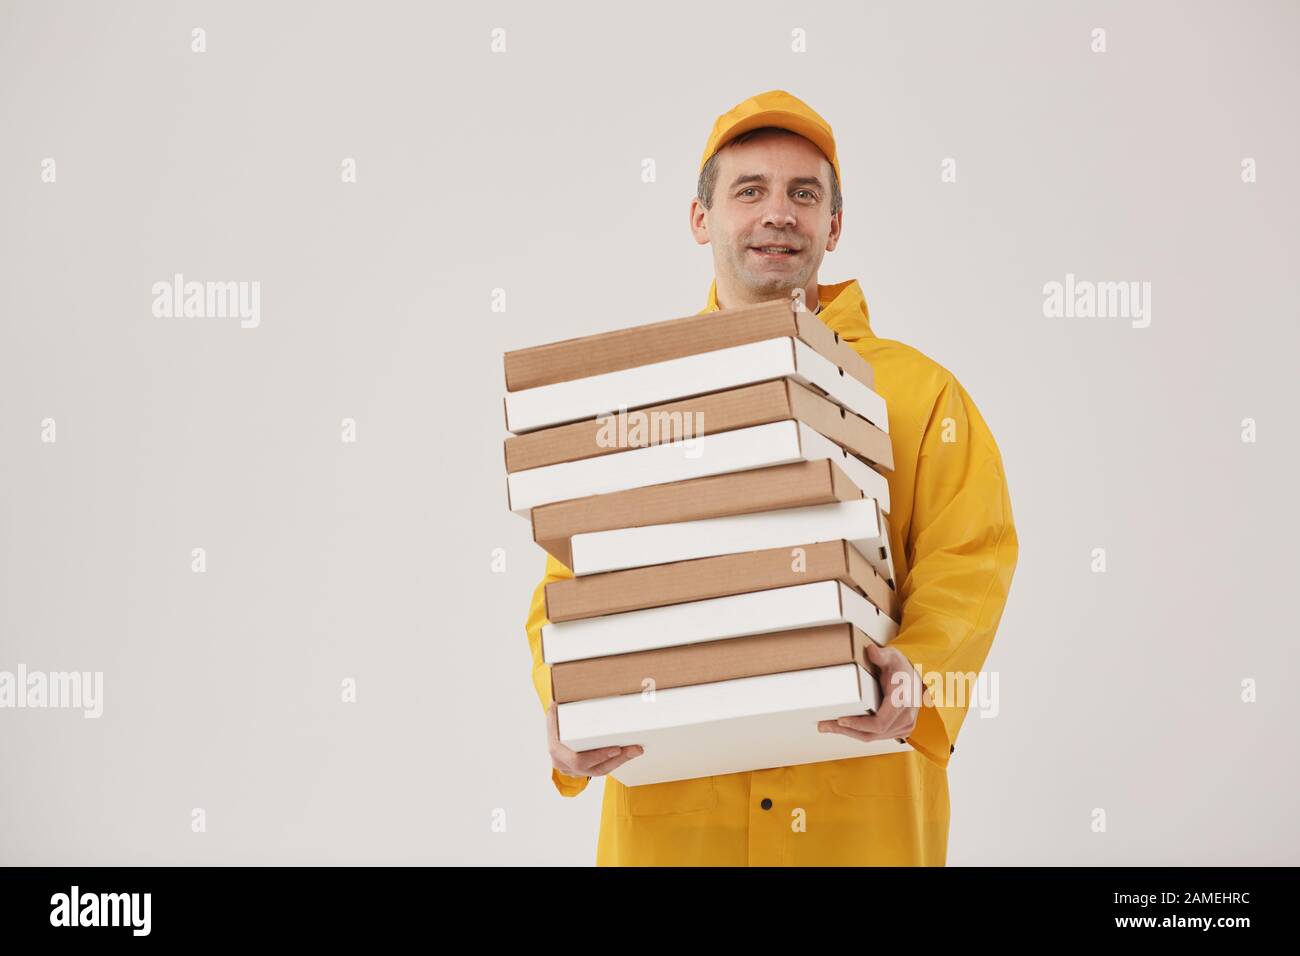 Waist up portrait of adult delivery man holding pizza boxes and smiling cheerfully at camera while standing against white background, copy space Stock Photo